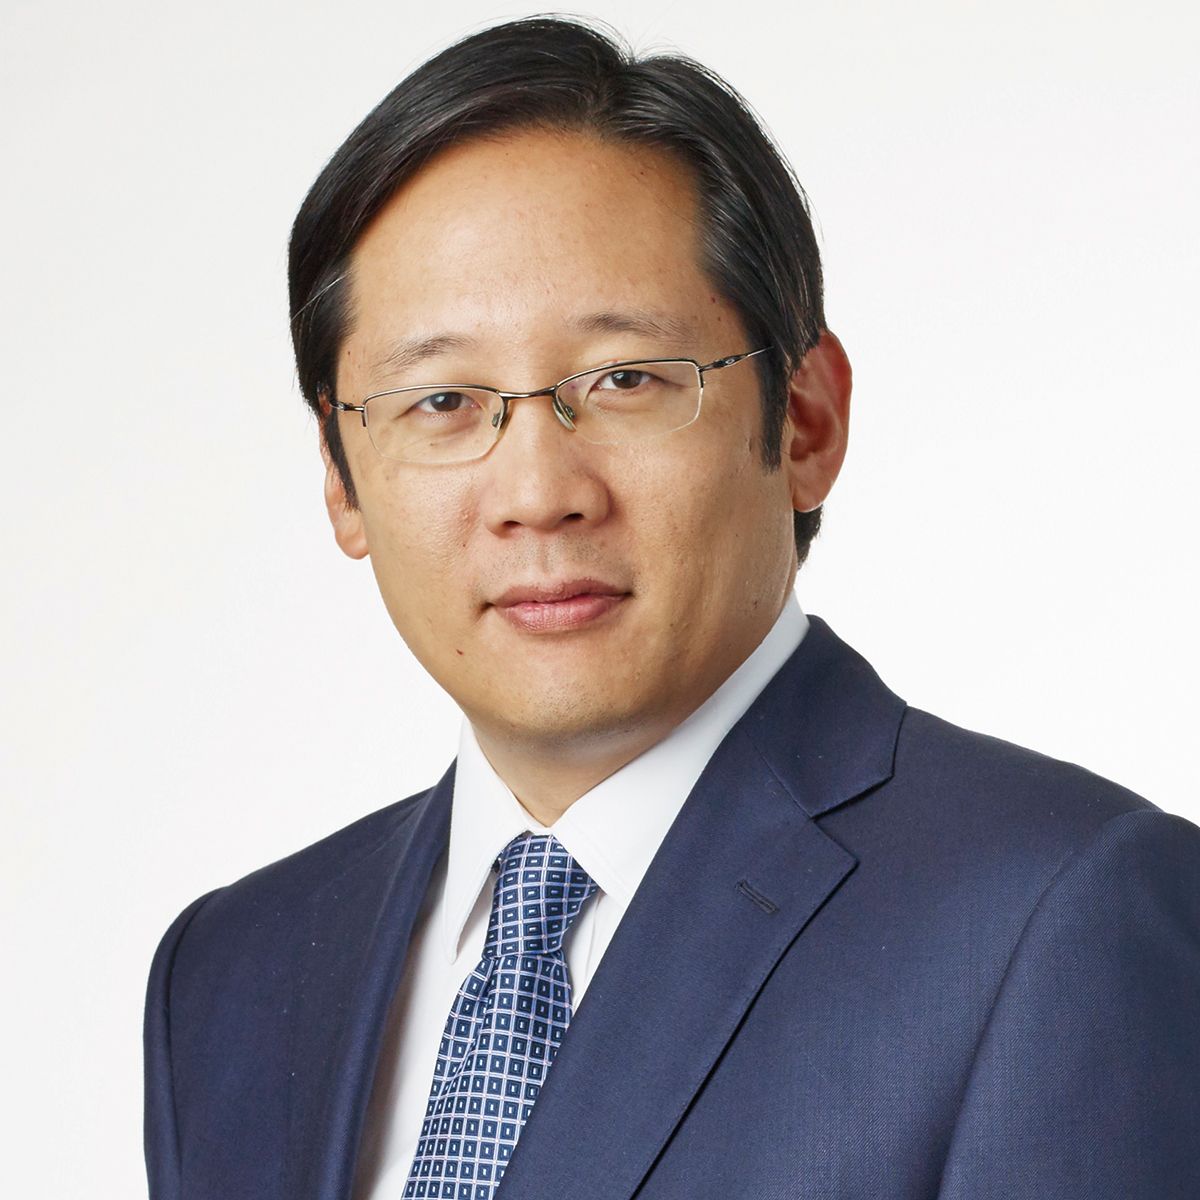 SGX Group Aims to Catalyze Capital for Real-World Decarbonization